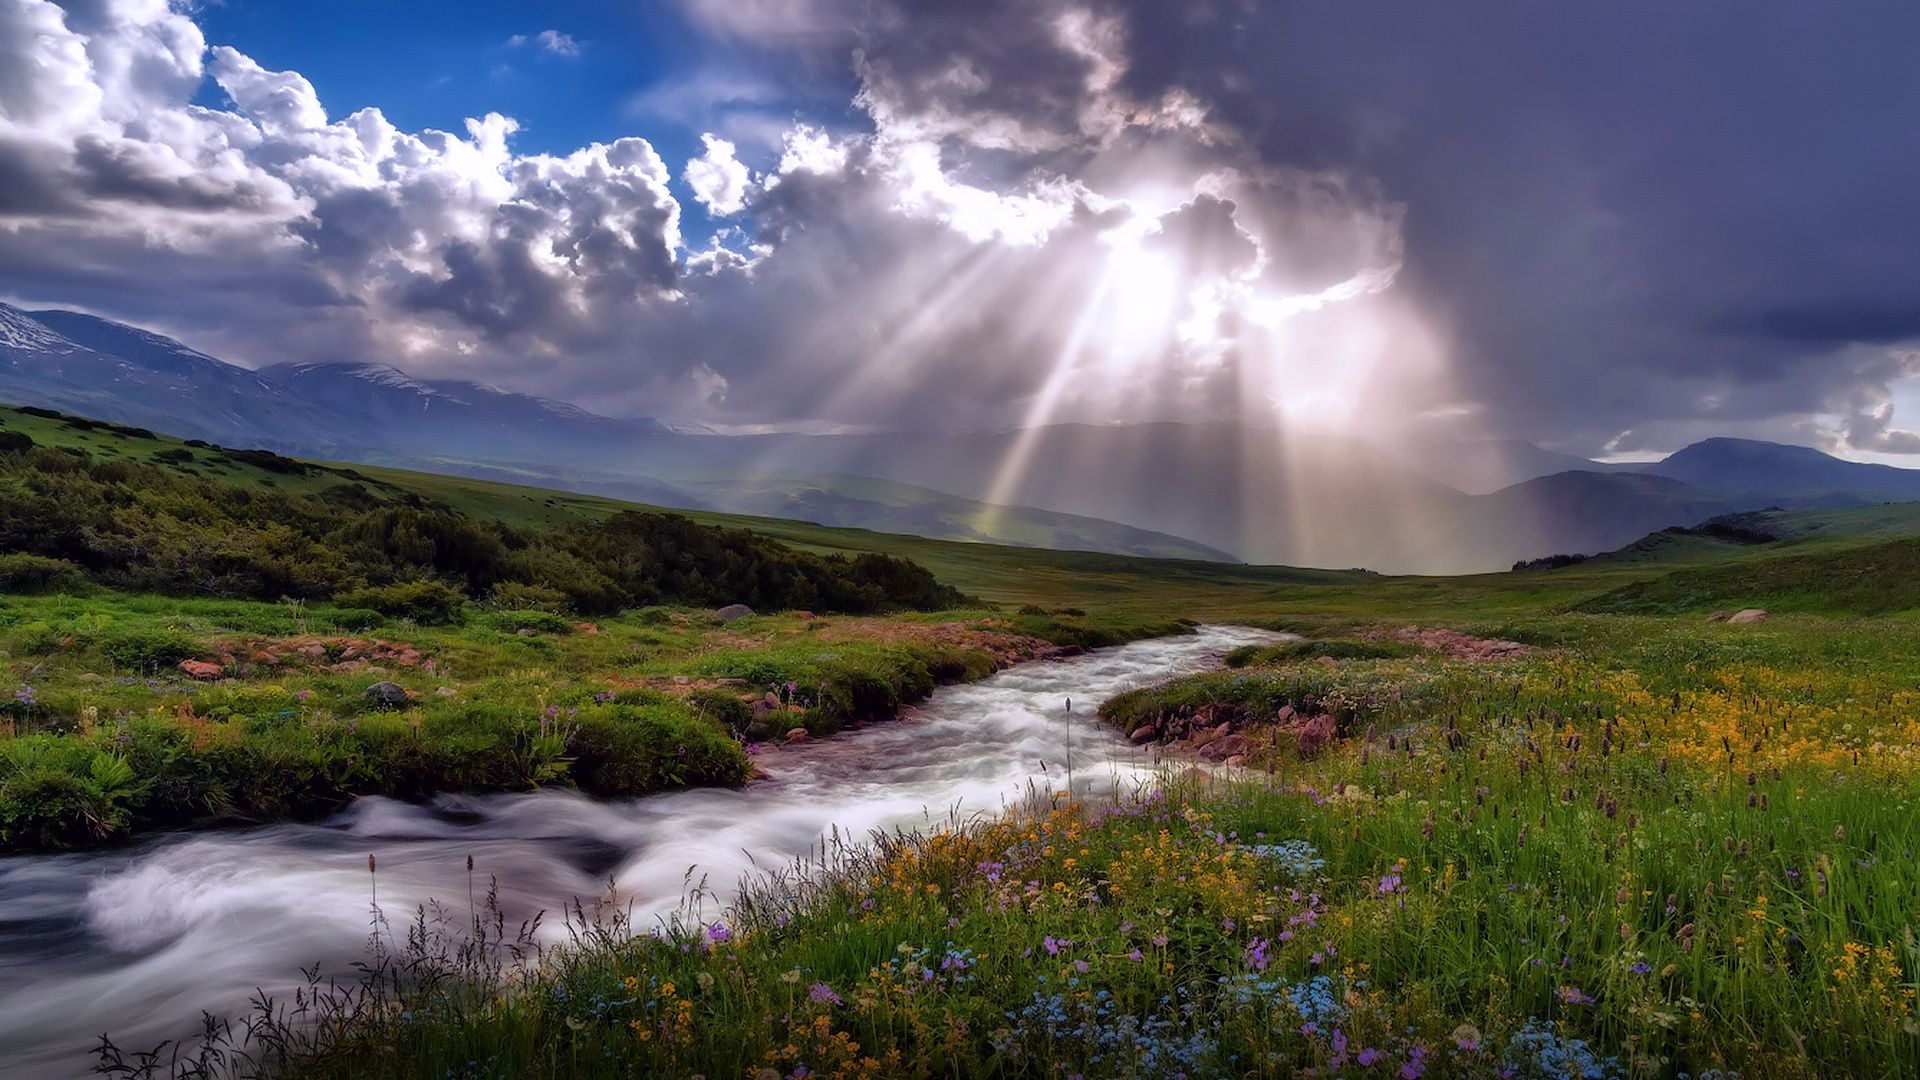 Wallpaper. Nature. photo. picture. valley, stream, flowers, the storm, summer